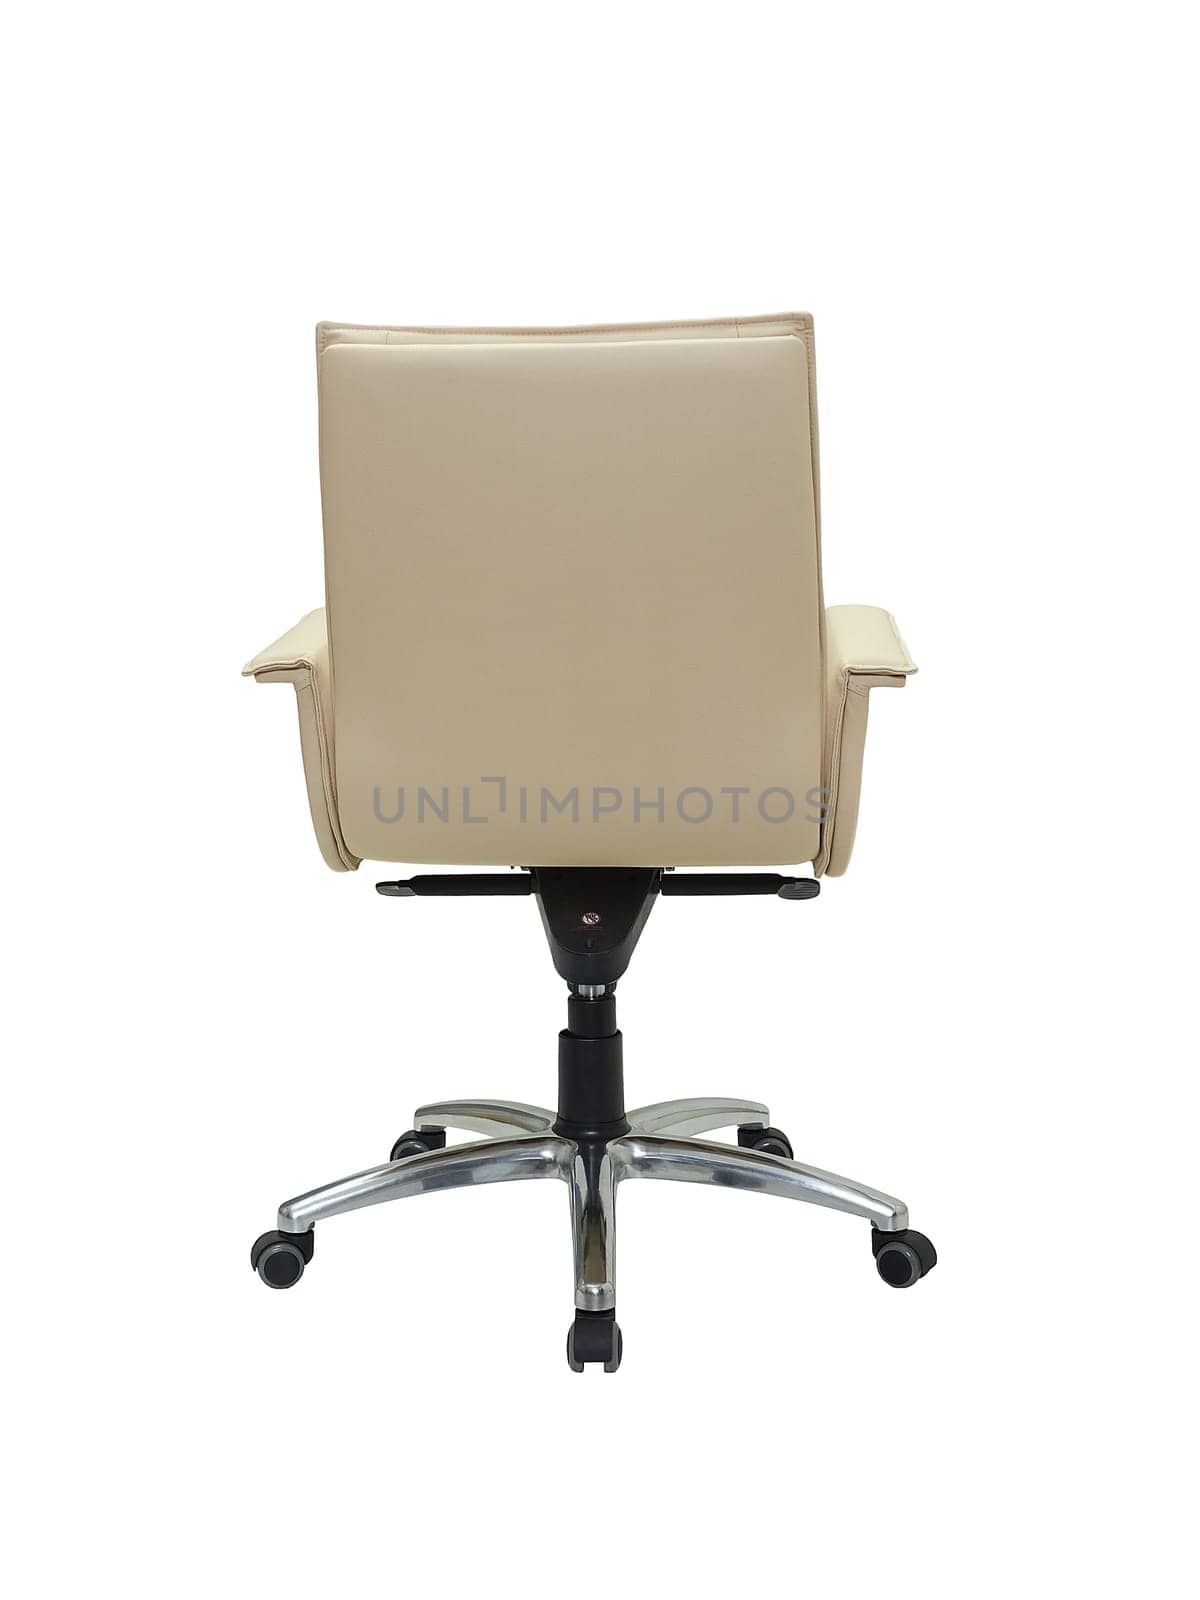 beige office armchair on wheels isolated on white background, back view by artemzatsepilin